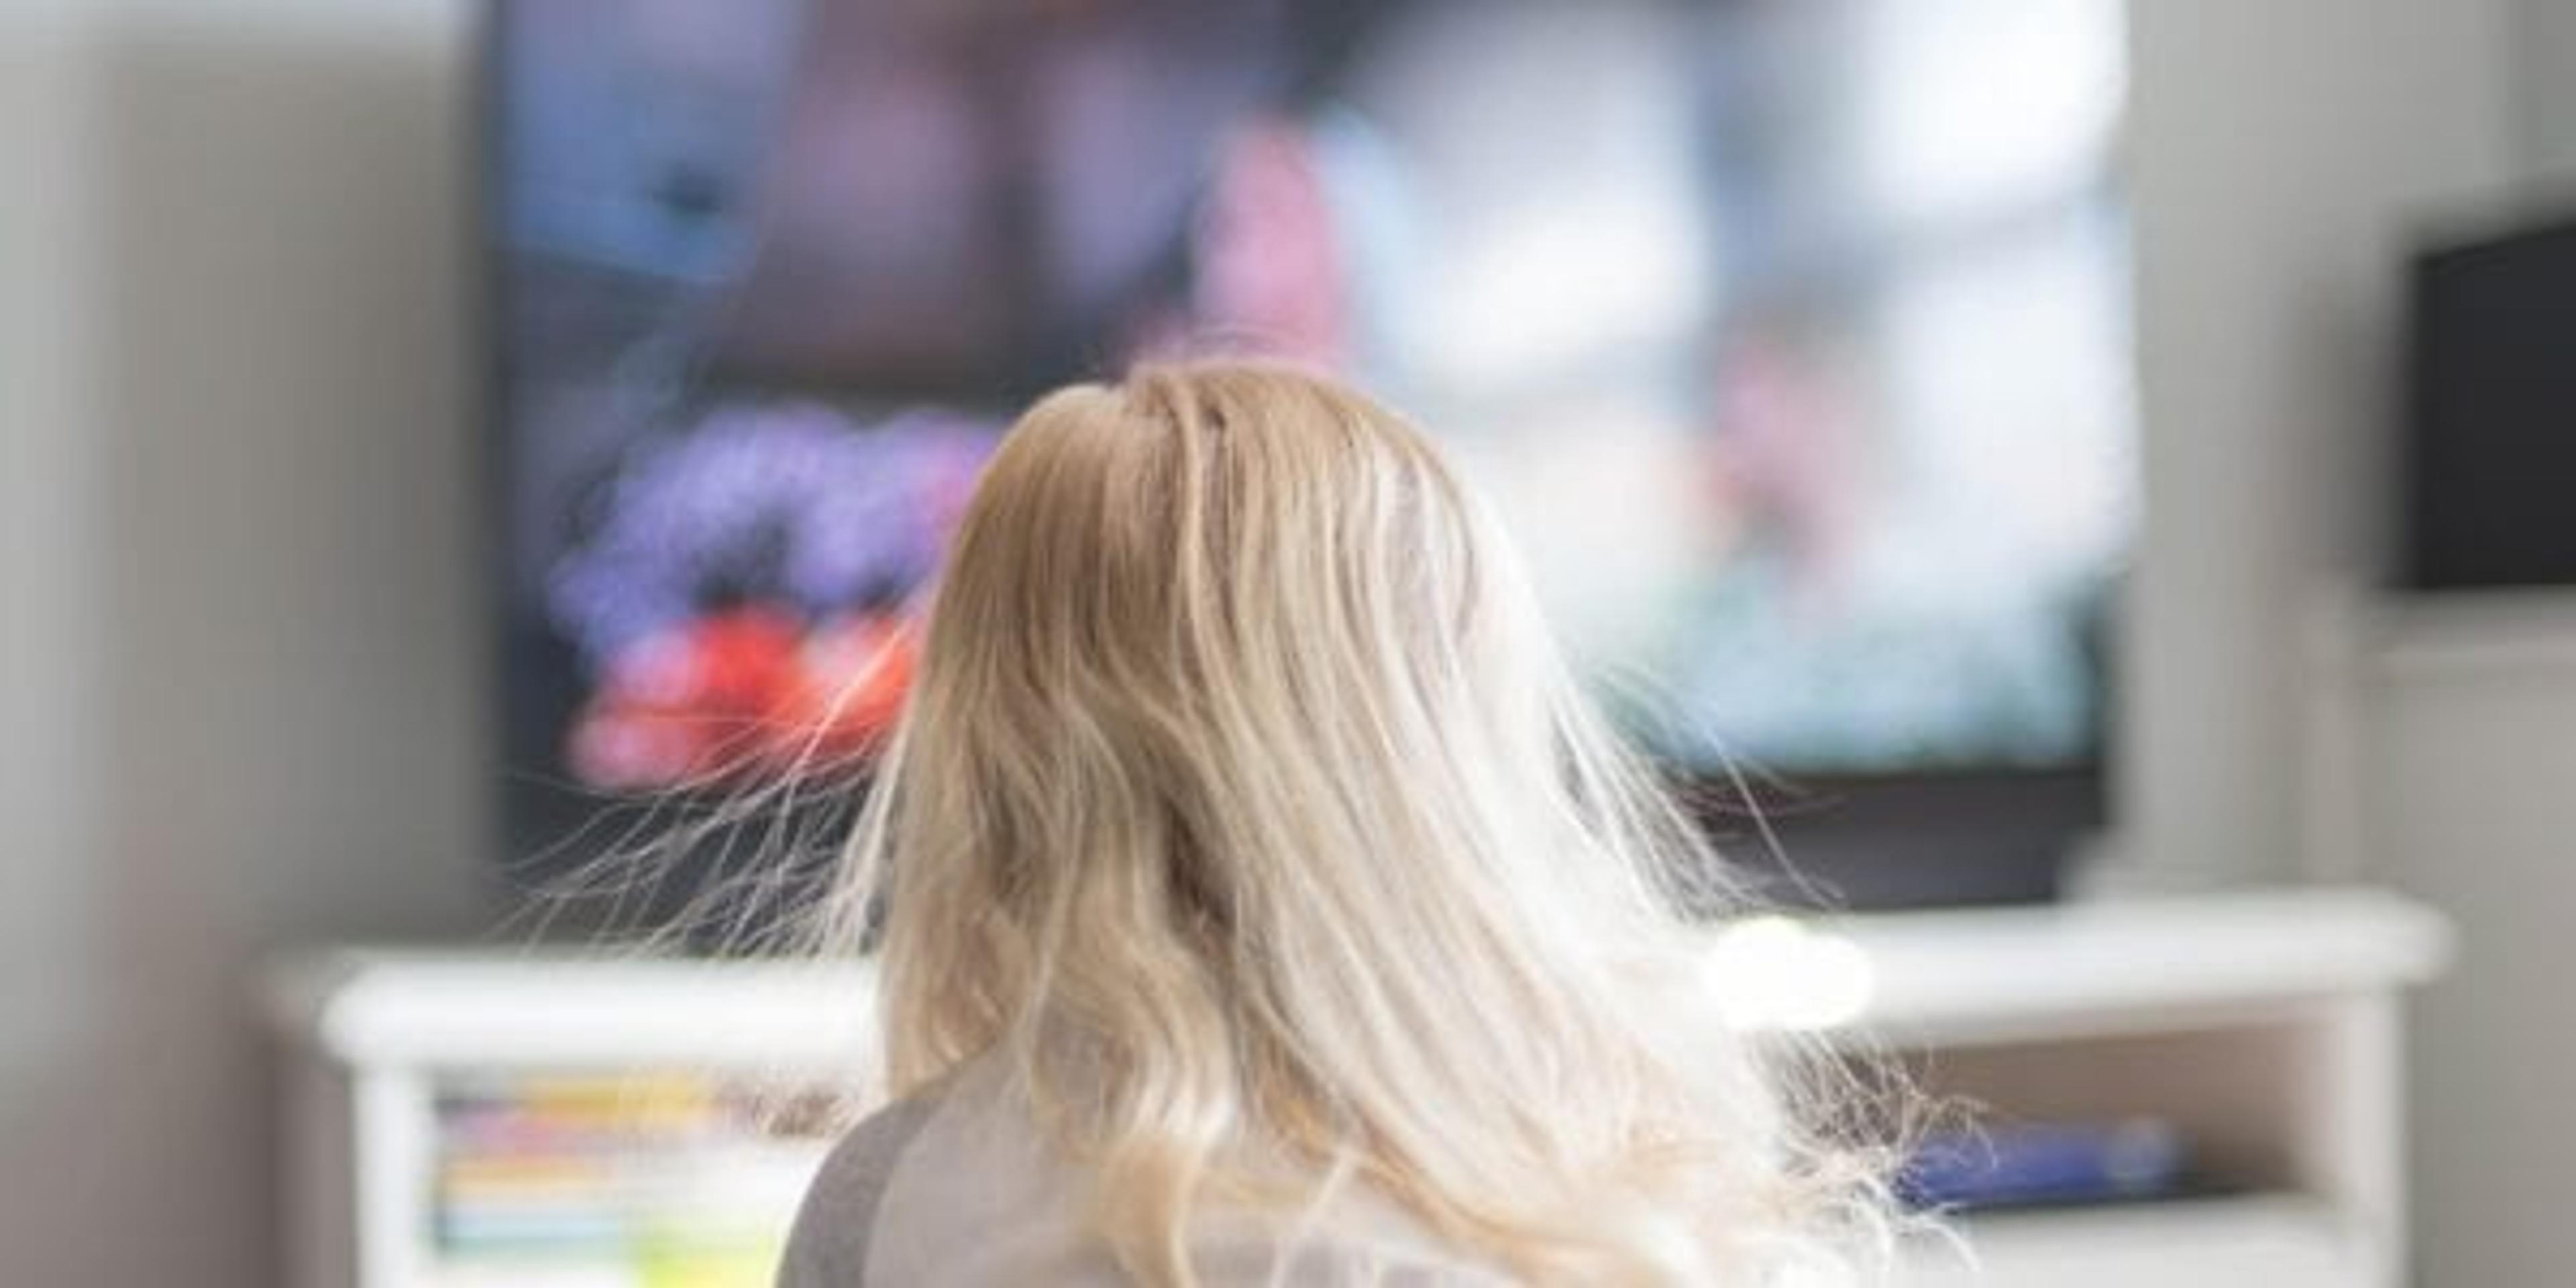 Young girl with blonde hair with static electricity watching TV